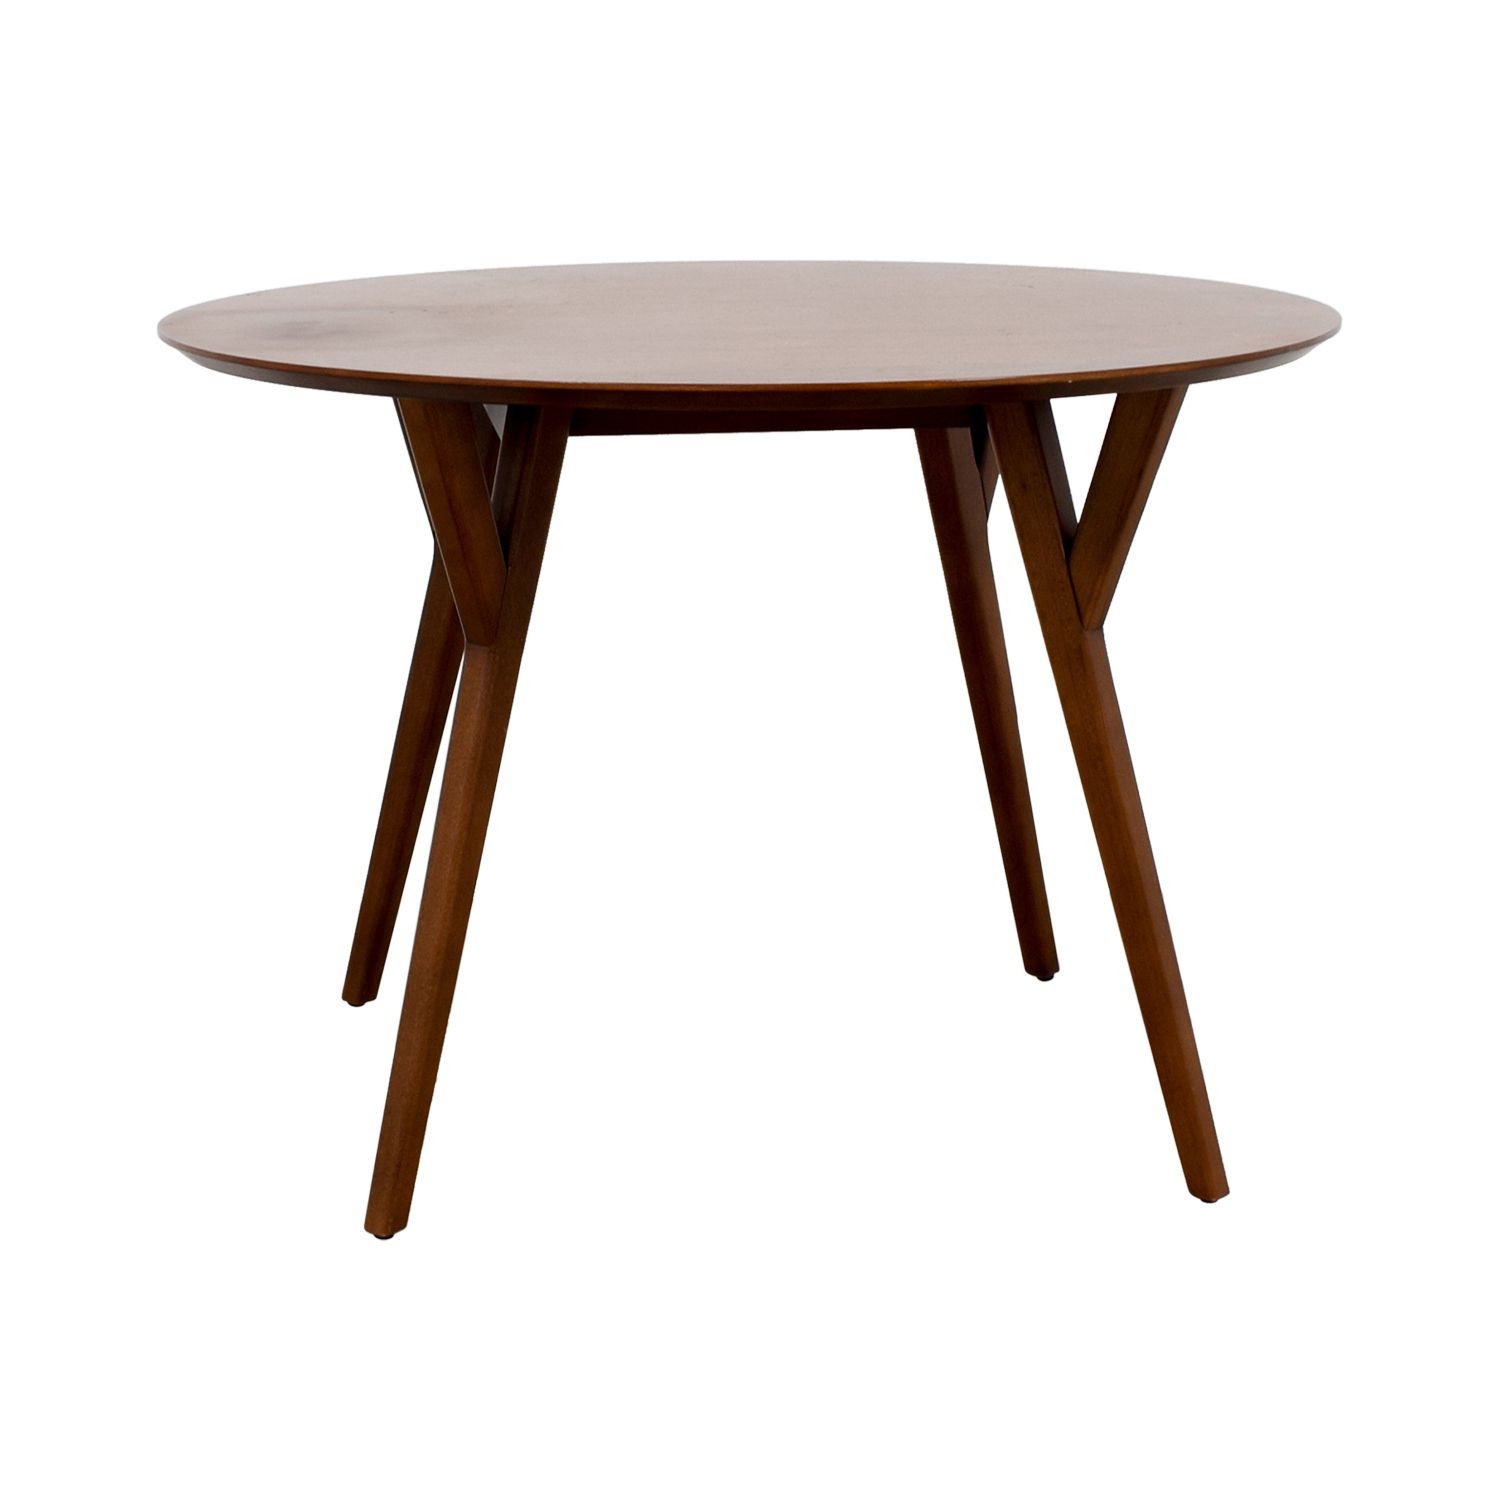 [%79% Off – West Elm West Elm Round Wood Dining Table / Tables Pertaining To Famous West Dining Tables|West Dining Tables Throughout Most Popular 79% Off – West Elm West Elm Round Wood Dining Table / Tables|Most Recent West Dining Tables Inside 79% Off – West Elm West Elm Round Wood Dining Table / Tables|Most Recently Released 79% Off – West Elm West Elm Round Wood Dining Table / Tables In West Dining Tables%] (View 6 of 25)